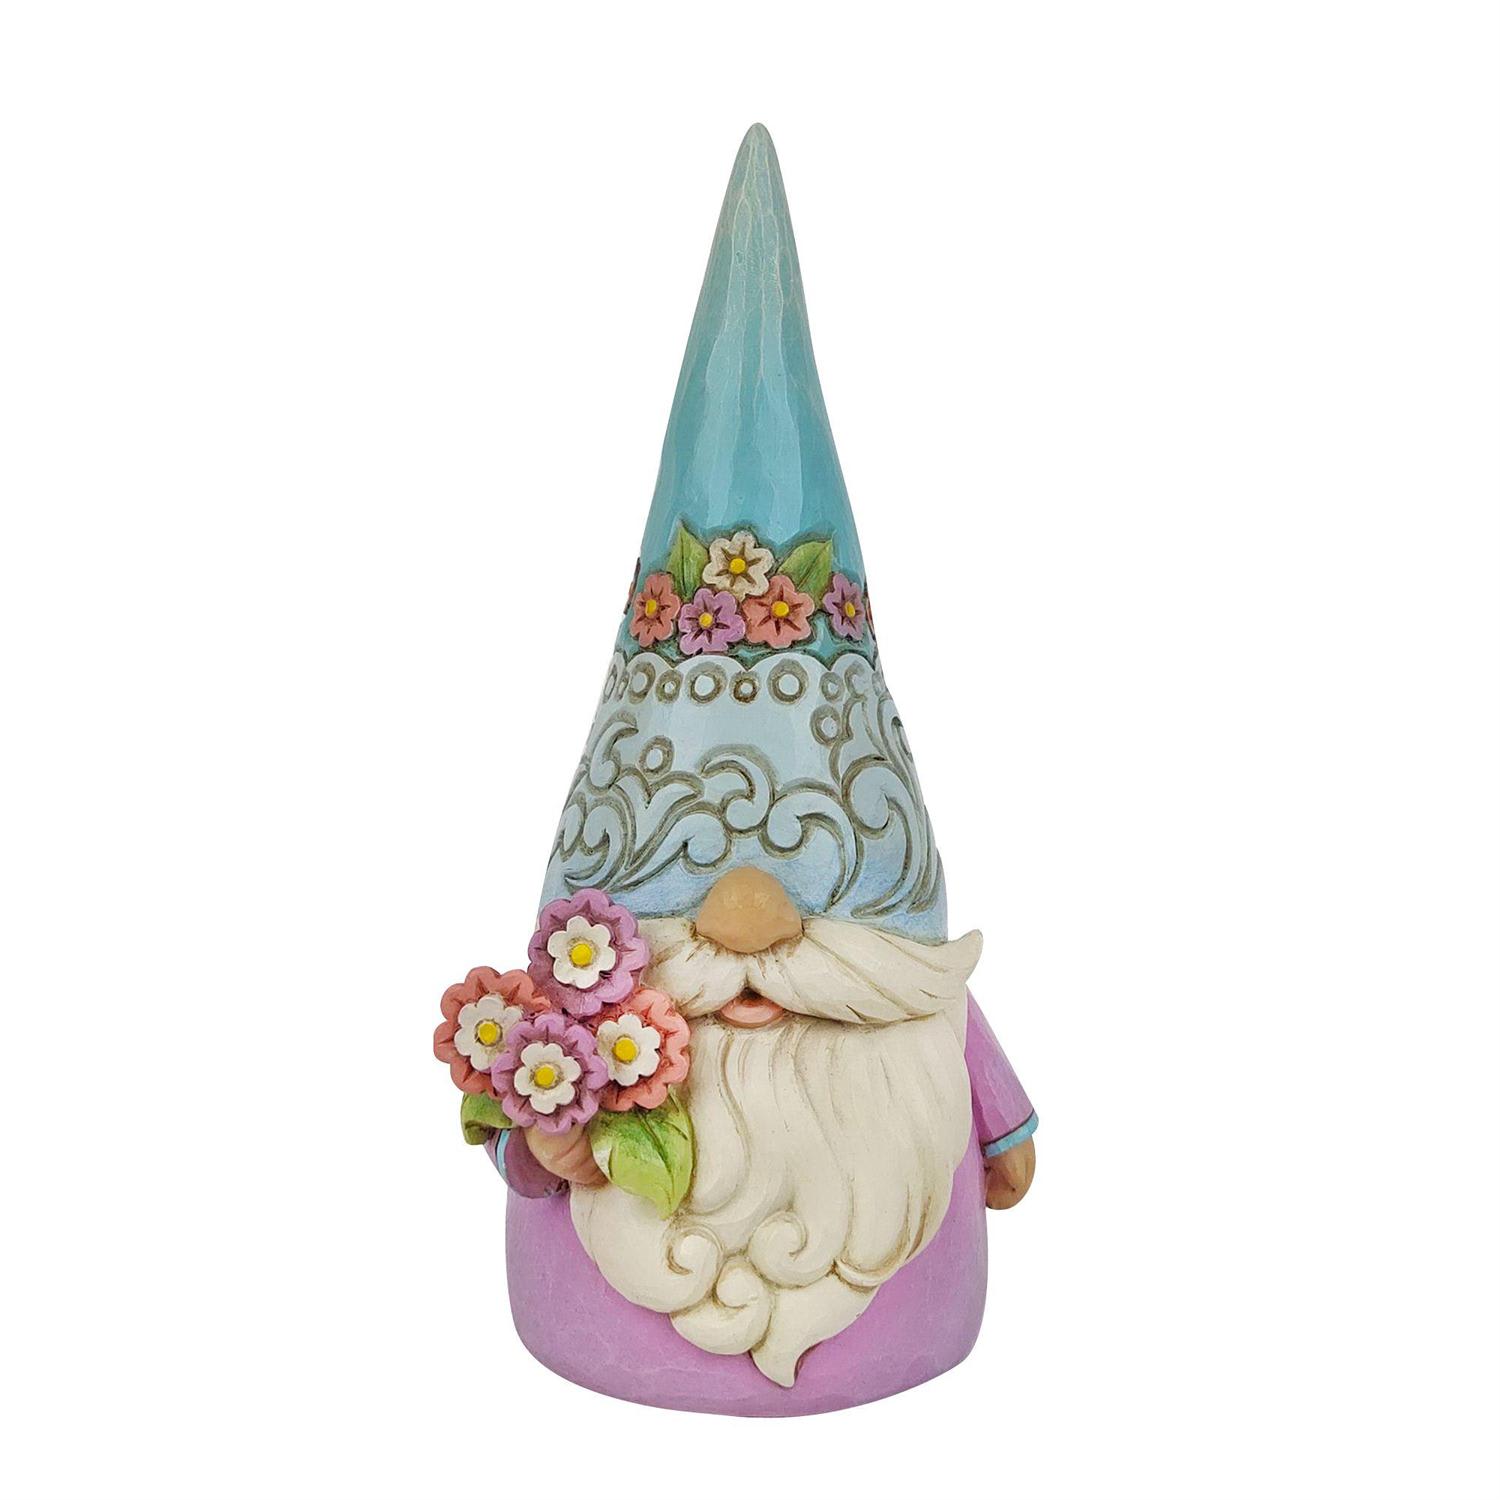 Jim Shore - Gnome with Flowers by Riverview Florist